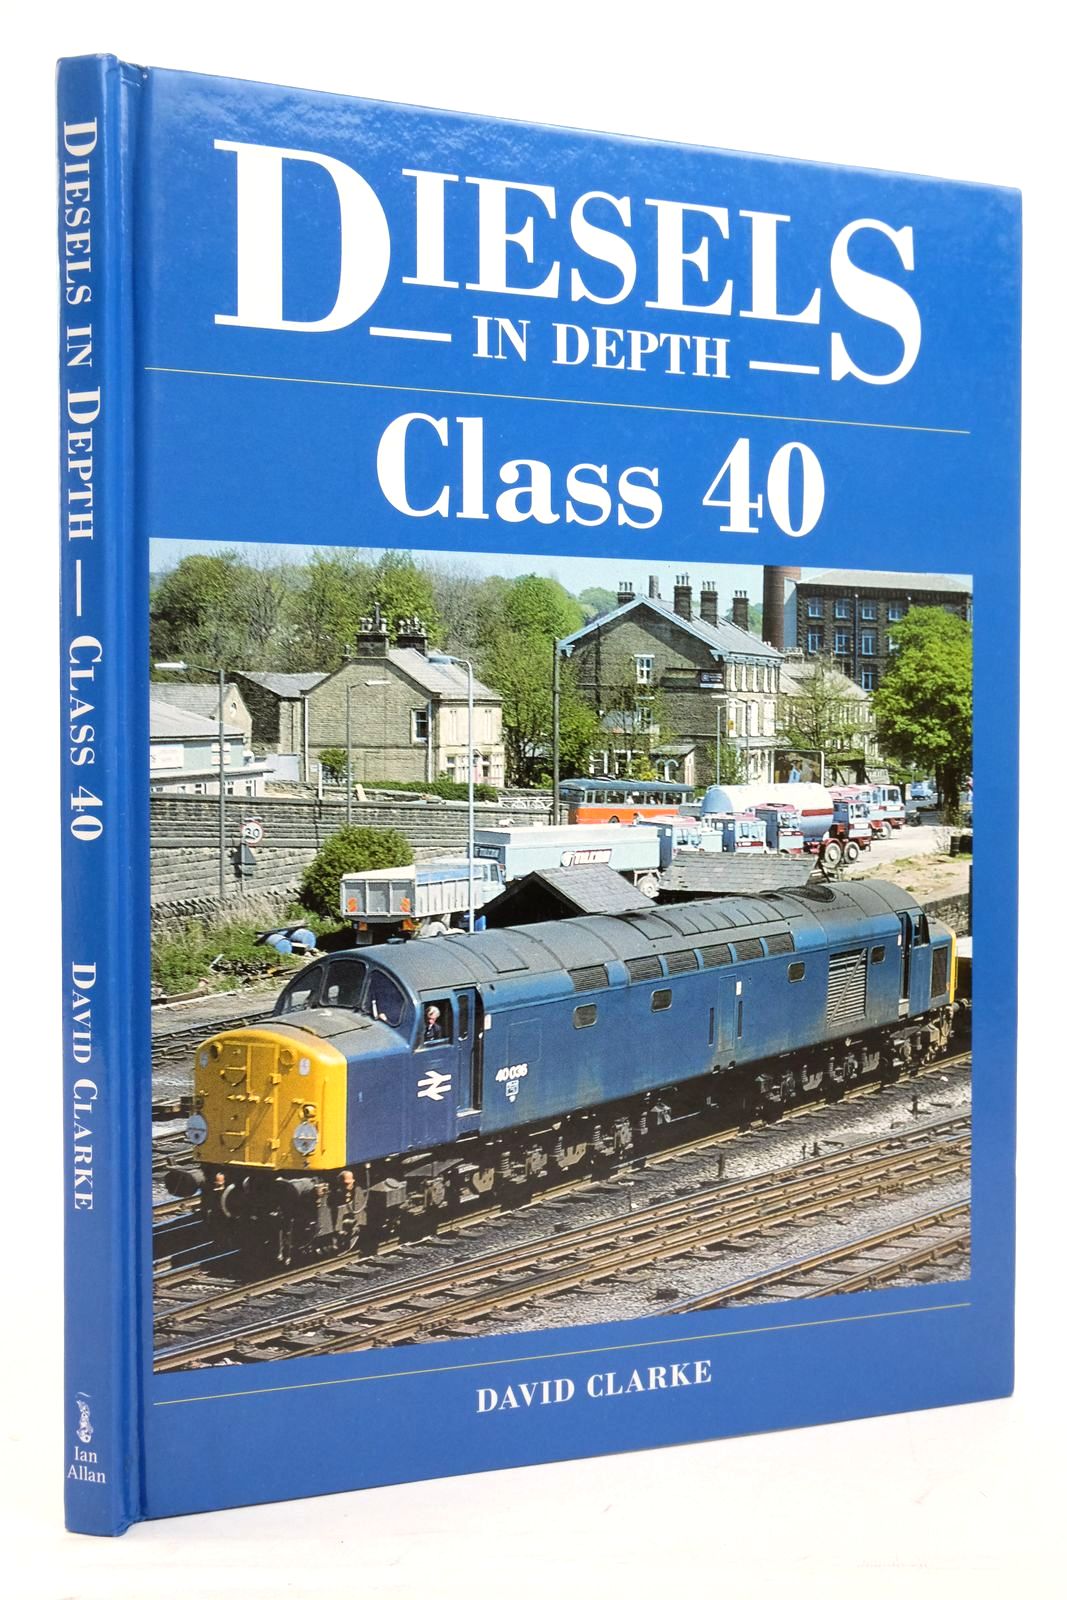 Photo of DIESELS IN DEPTH CLASS 40- Stock Number: 2136614